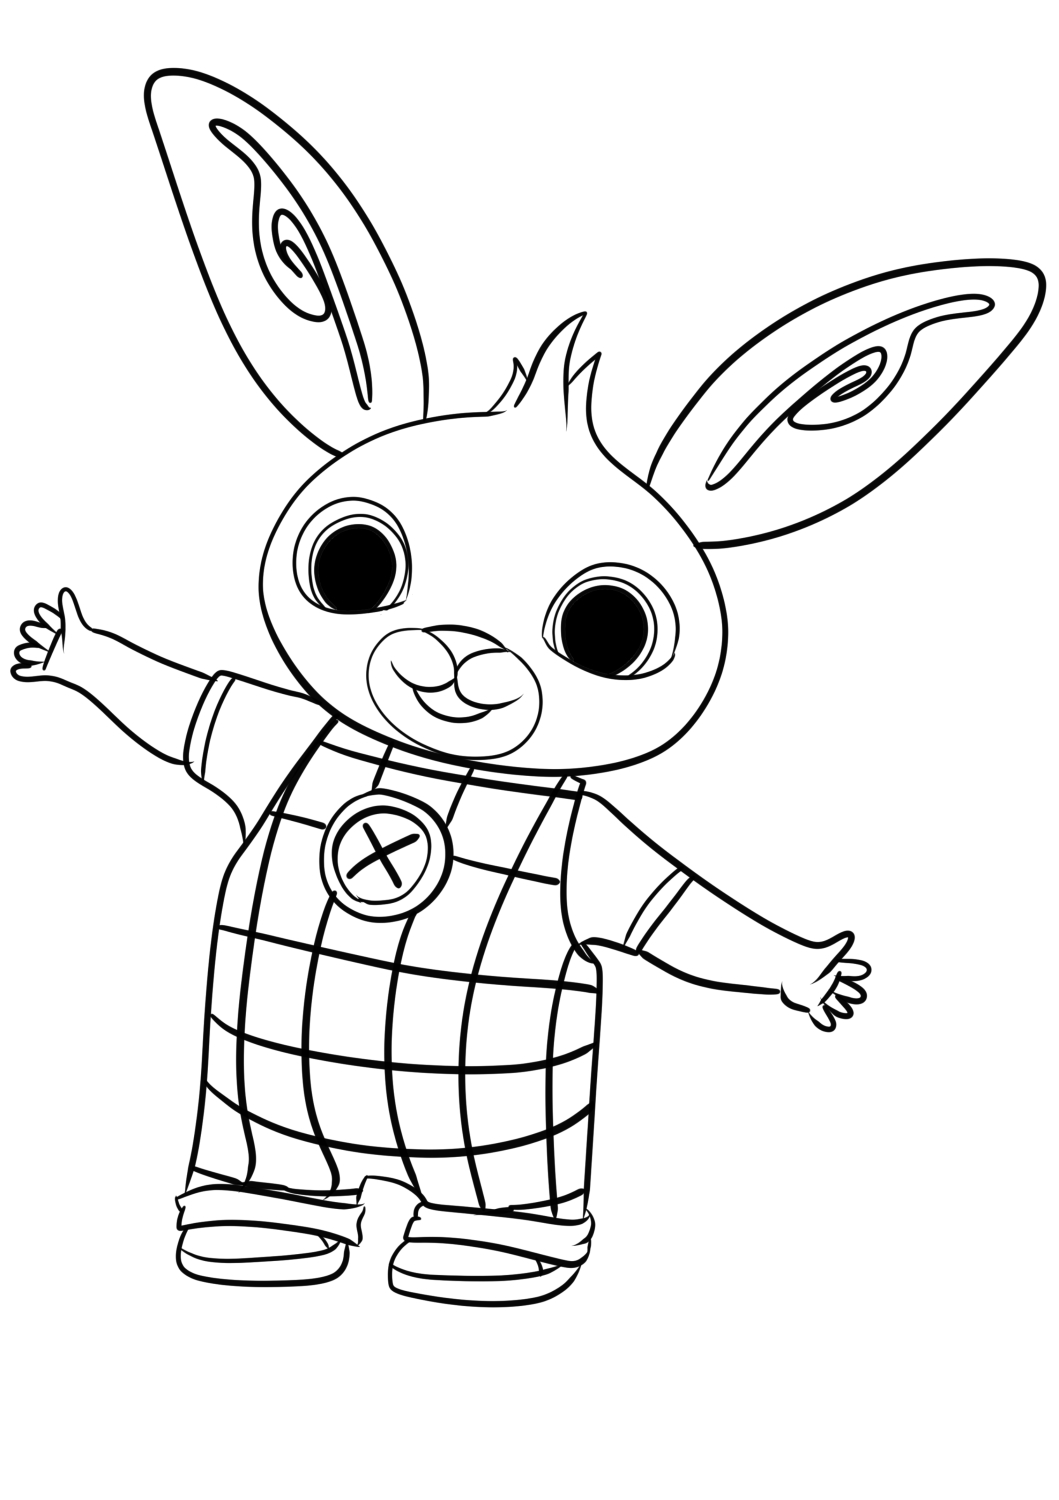 Drawing 02 from Bing coloring page